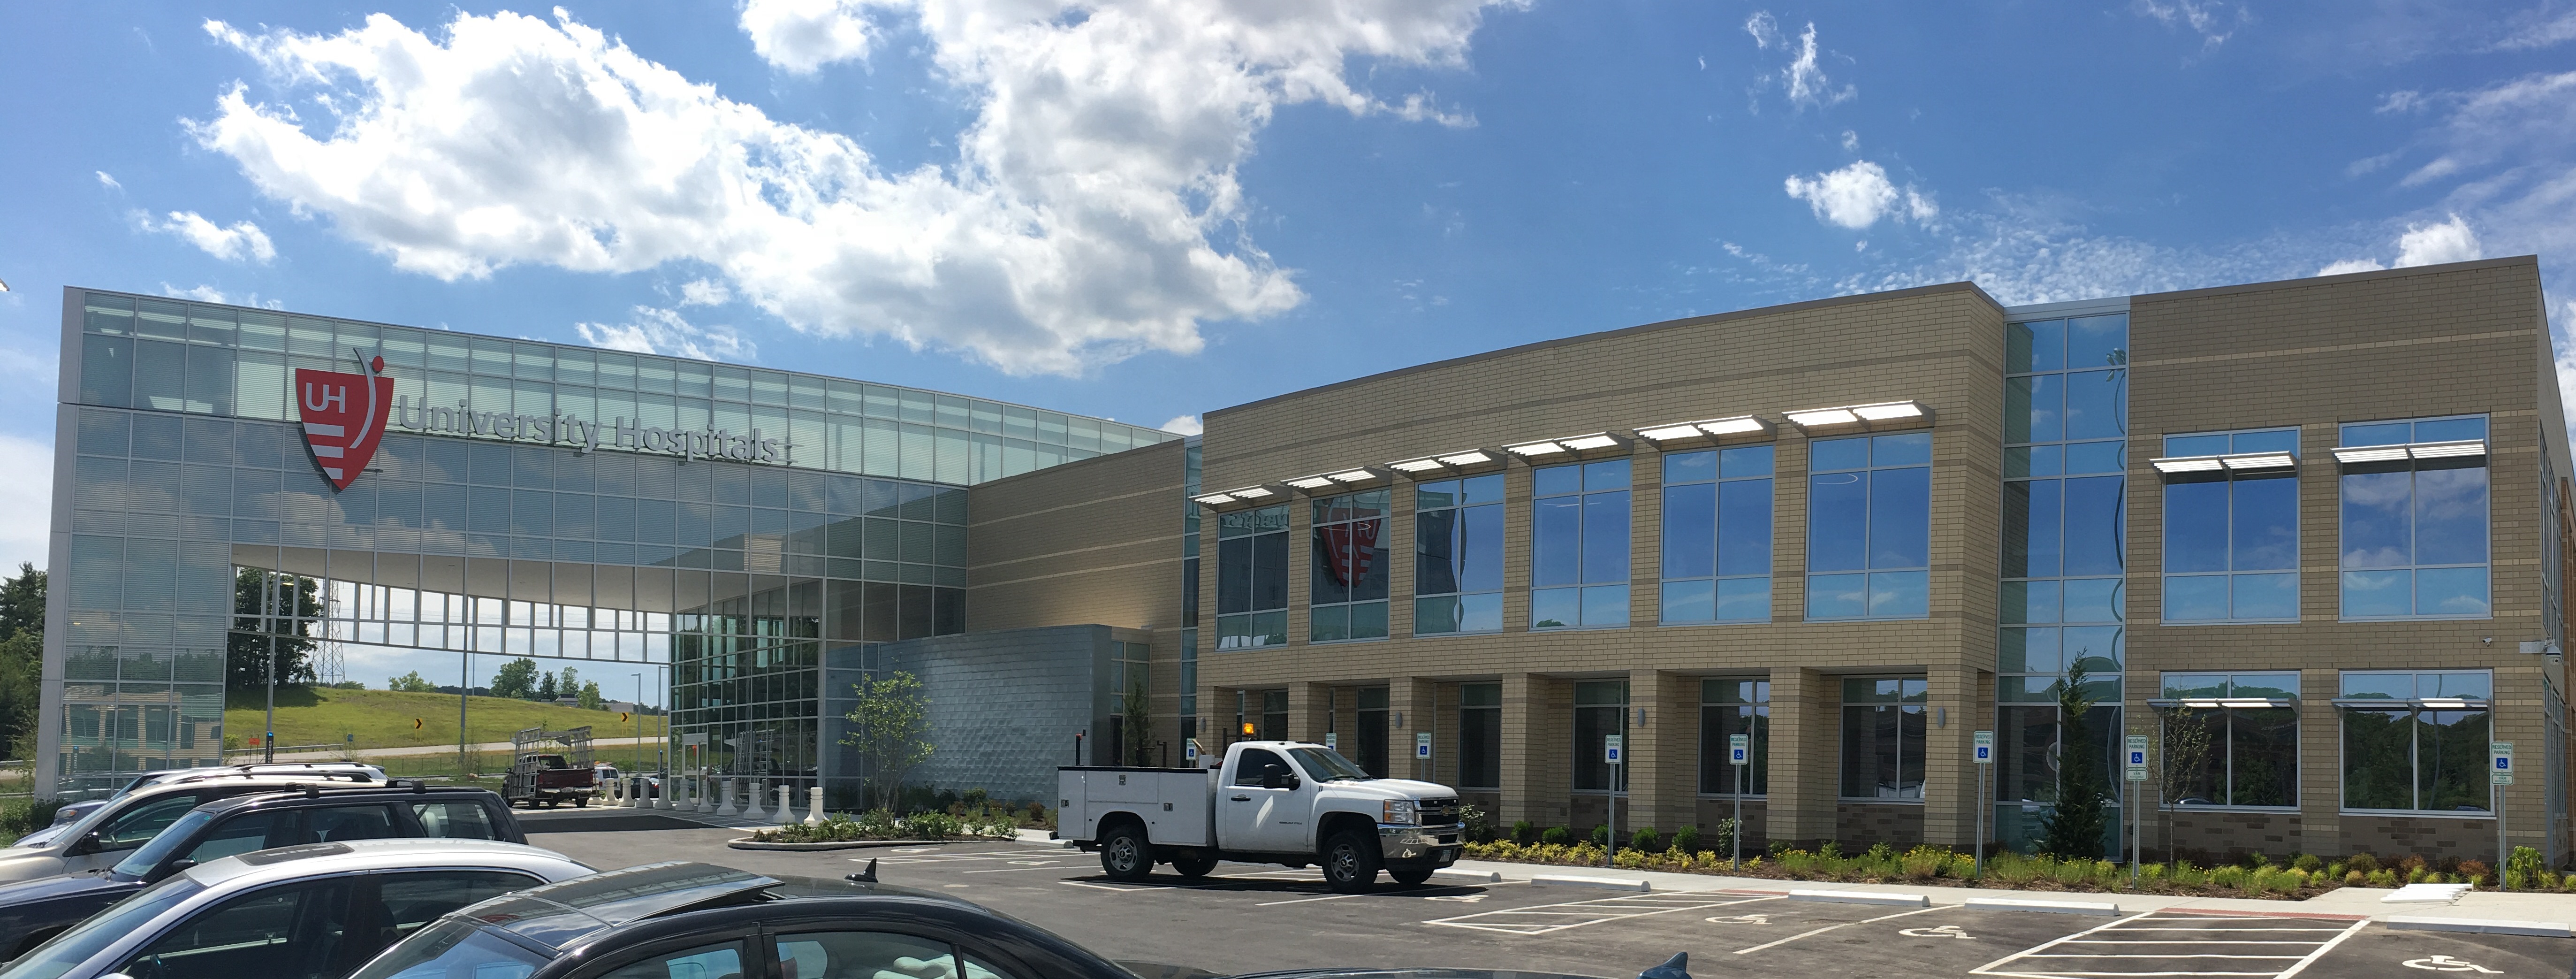 University Hospitals Broadview Heights Health Center - Industrial